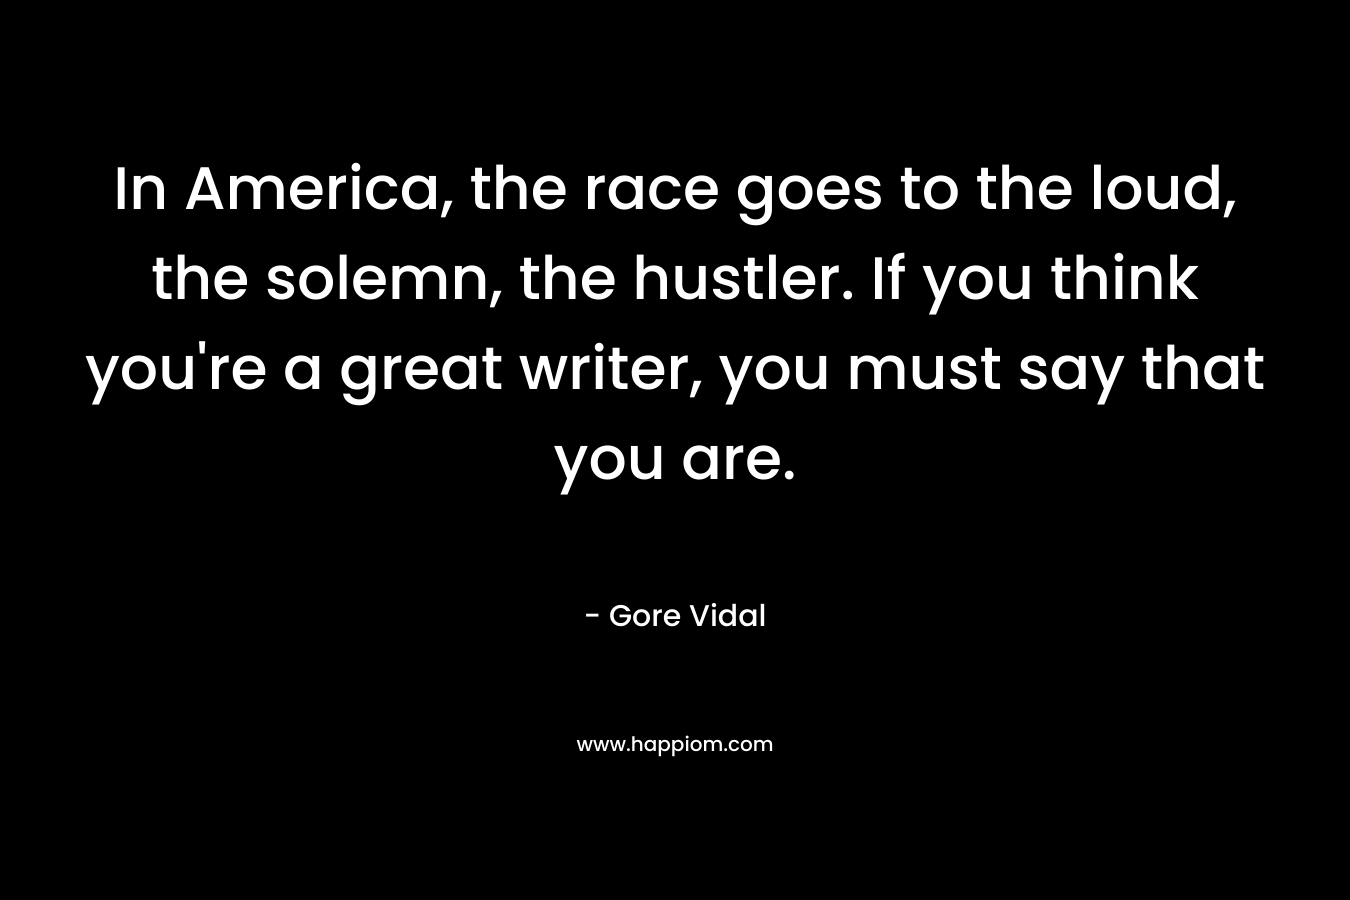 In America, the race goes to the loud, the solemn, the hustler. If you think you’re a great writer, you must say that you are. – Gore Vidal